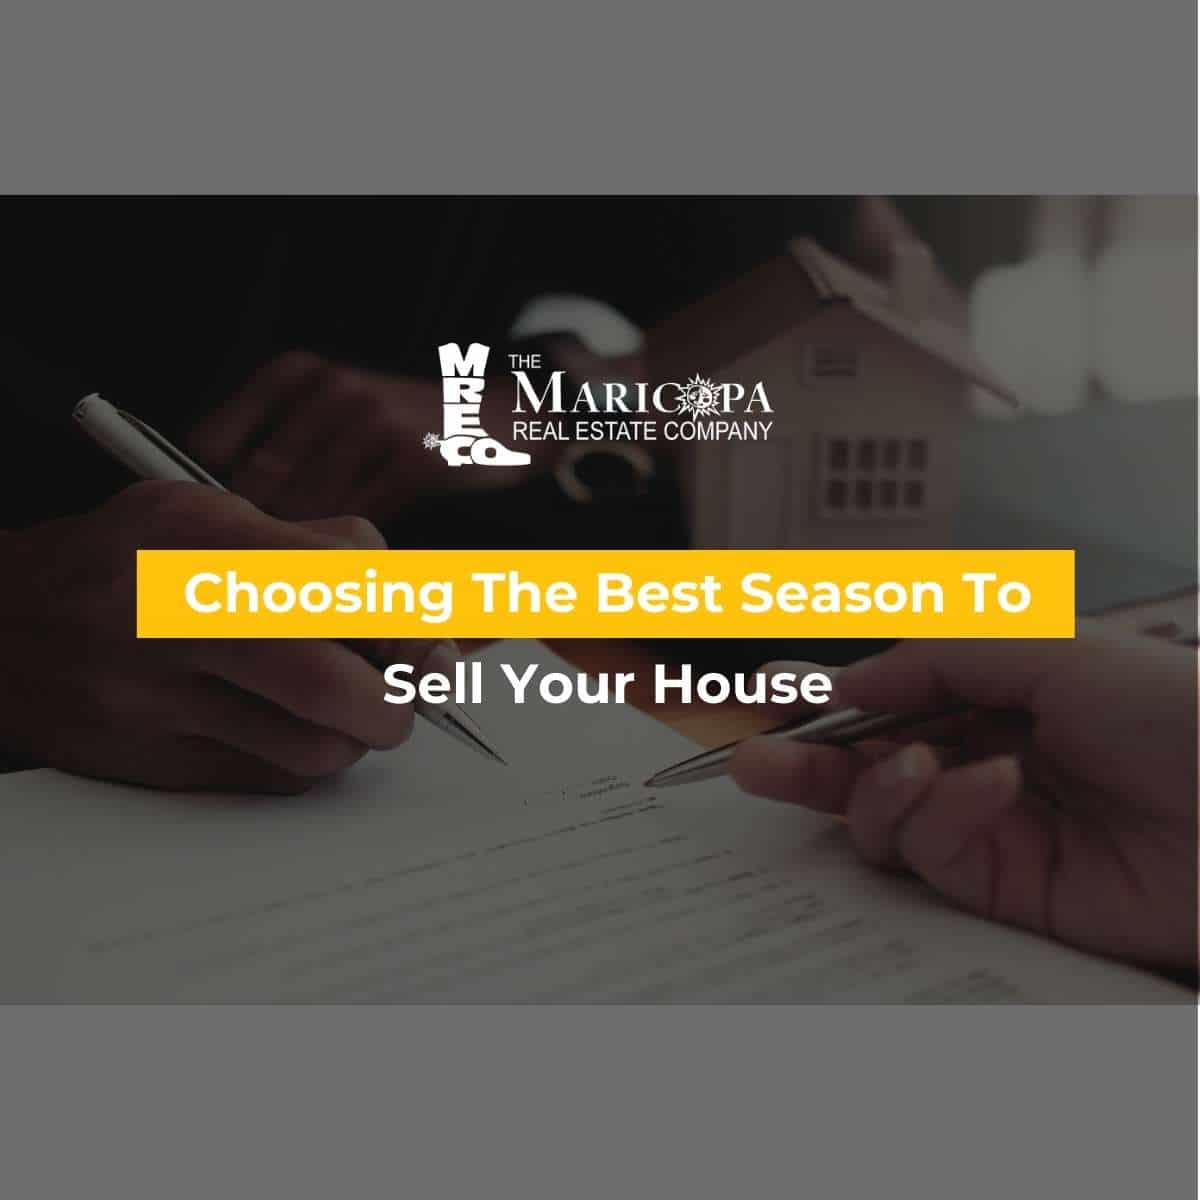 Choosing The Best Season To Sell Your House